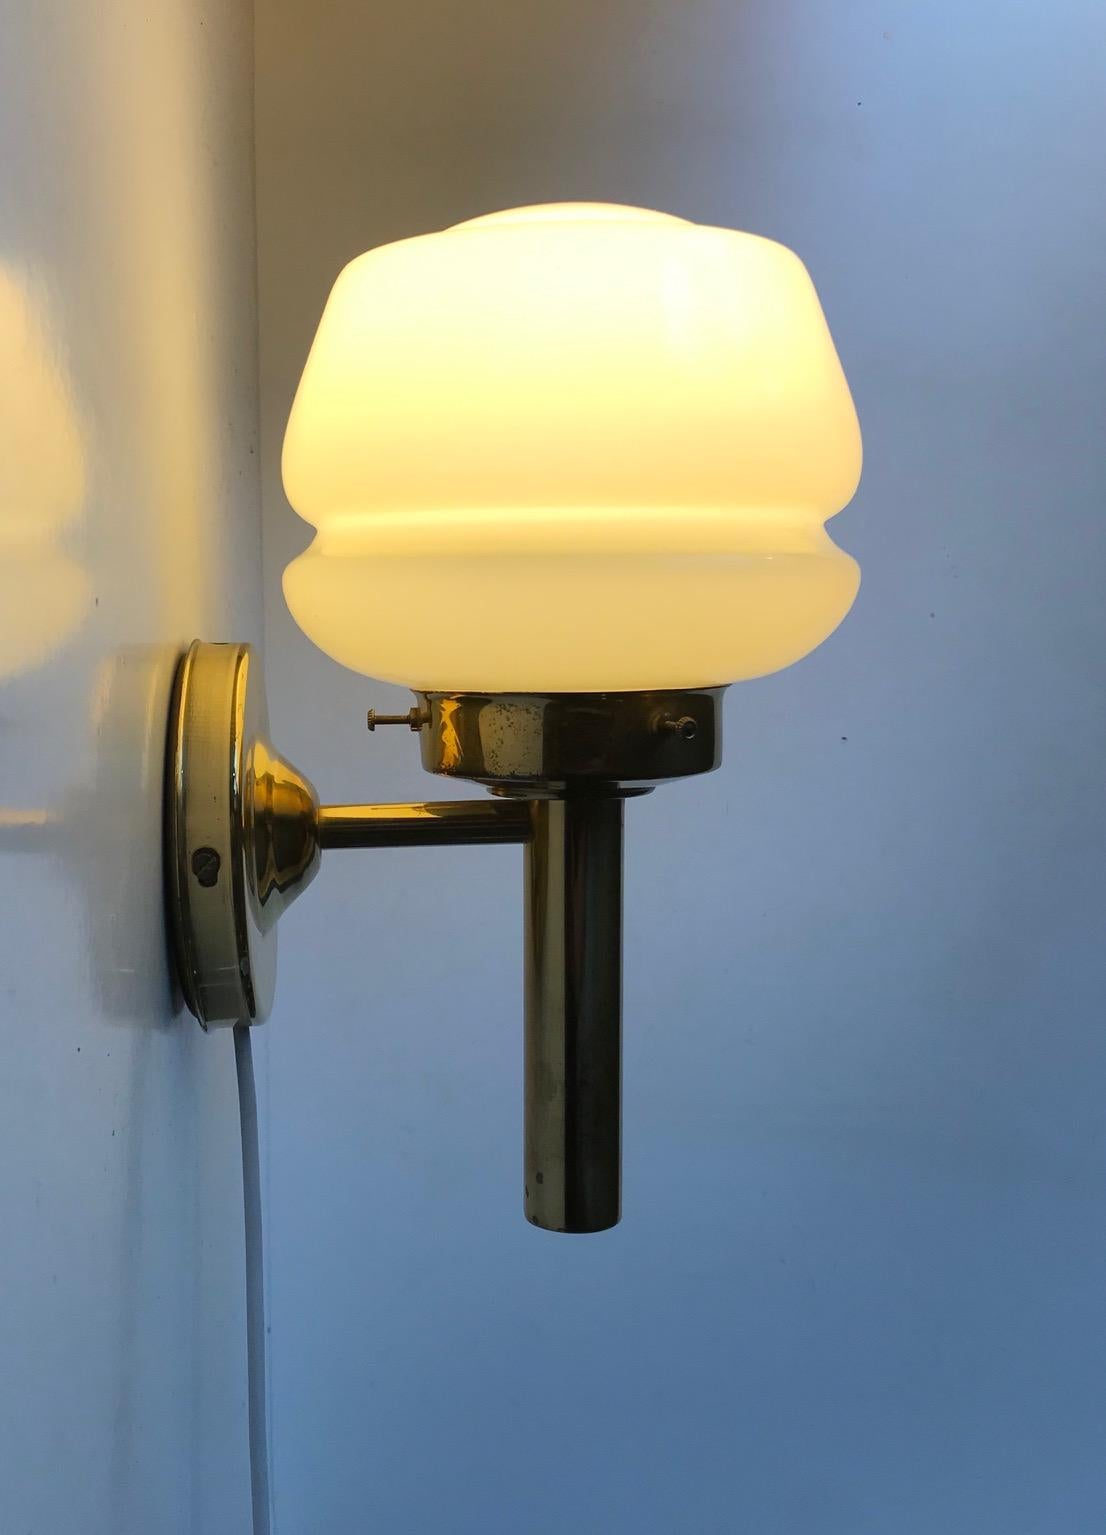 Art Deco revival sconce with vague yellow opaline glass shade manufactured and designed by Abo Metalkunst in a style reminiscent of Hans Agne Jakobsson and Michael Anastassiades some 40 years later. Nice vintage and working order with a light patina